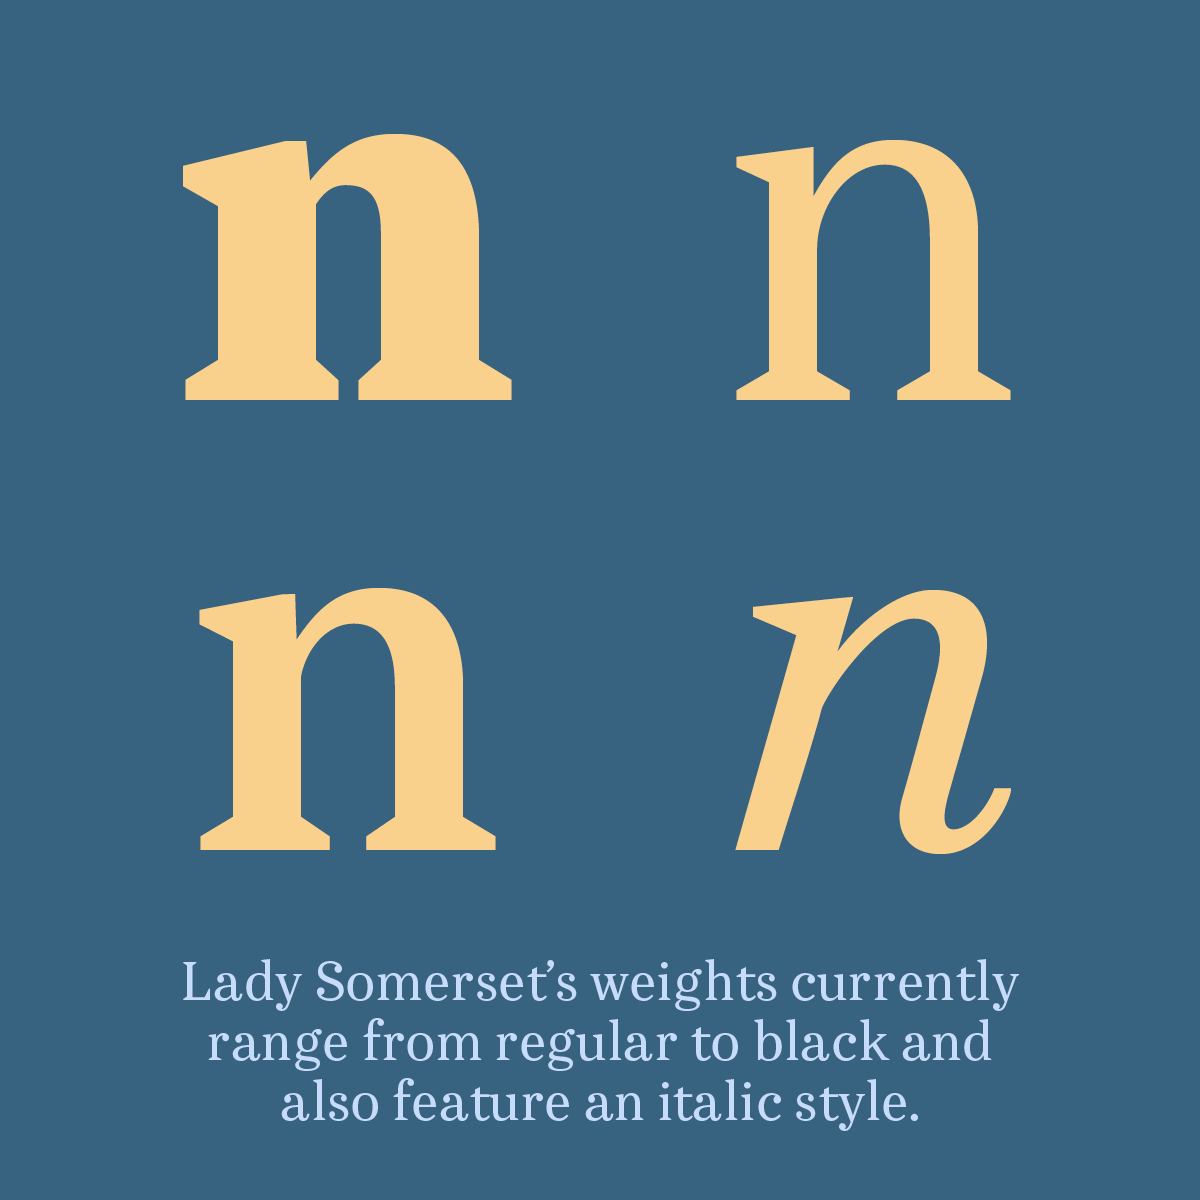 Lady Somerset's weights currently range from regular to black and also feature an italic style. The letter n in each style is displayed.